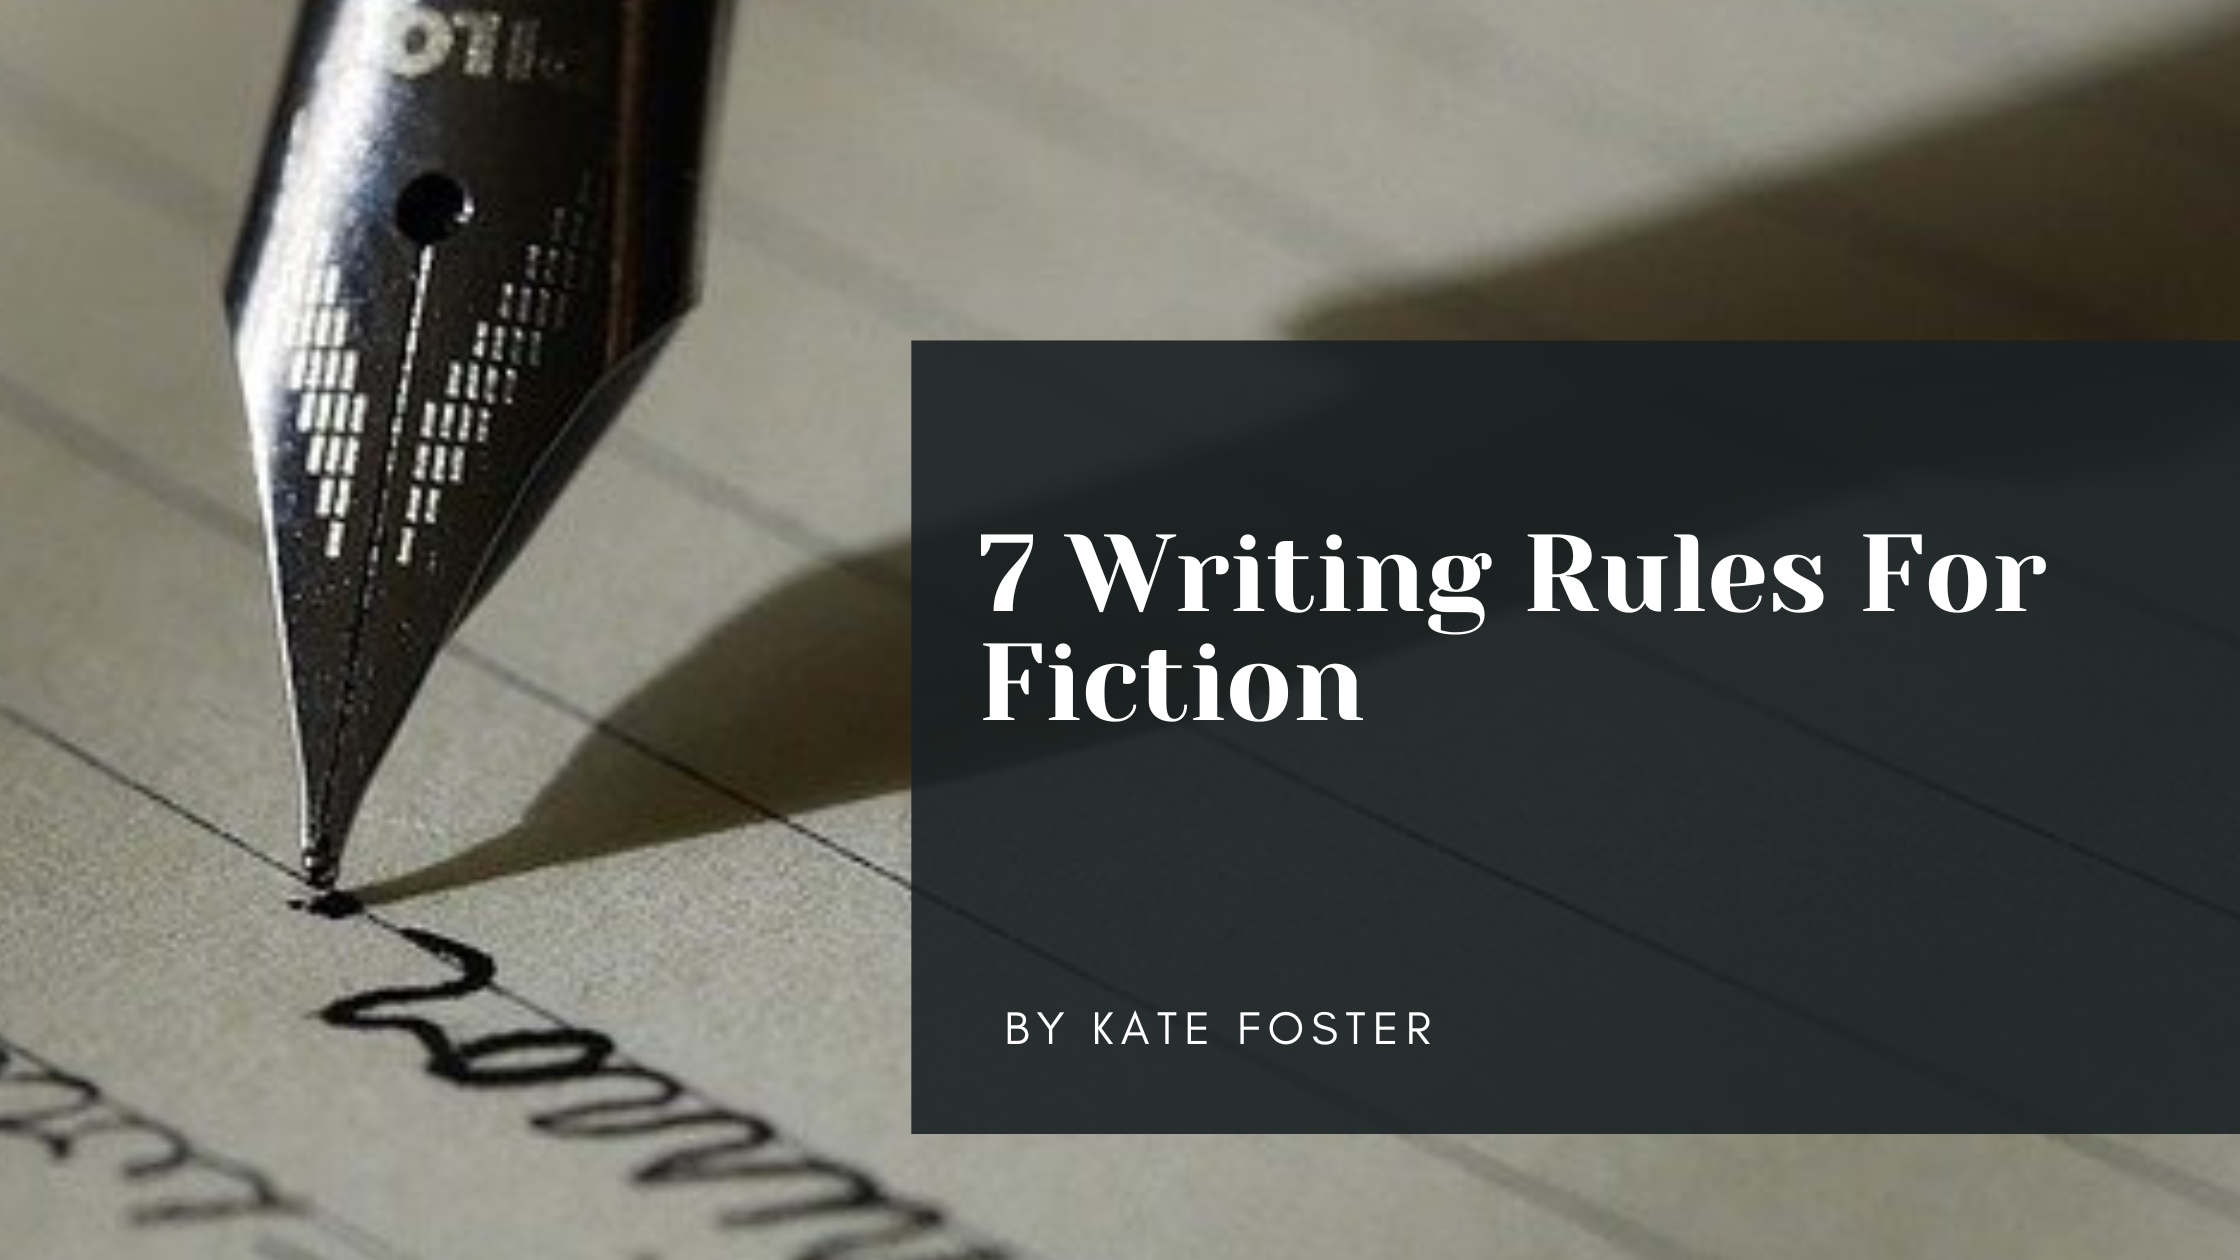 7 Writing Rules For Fiction